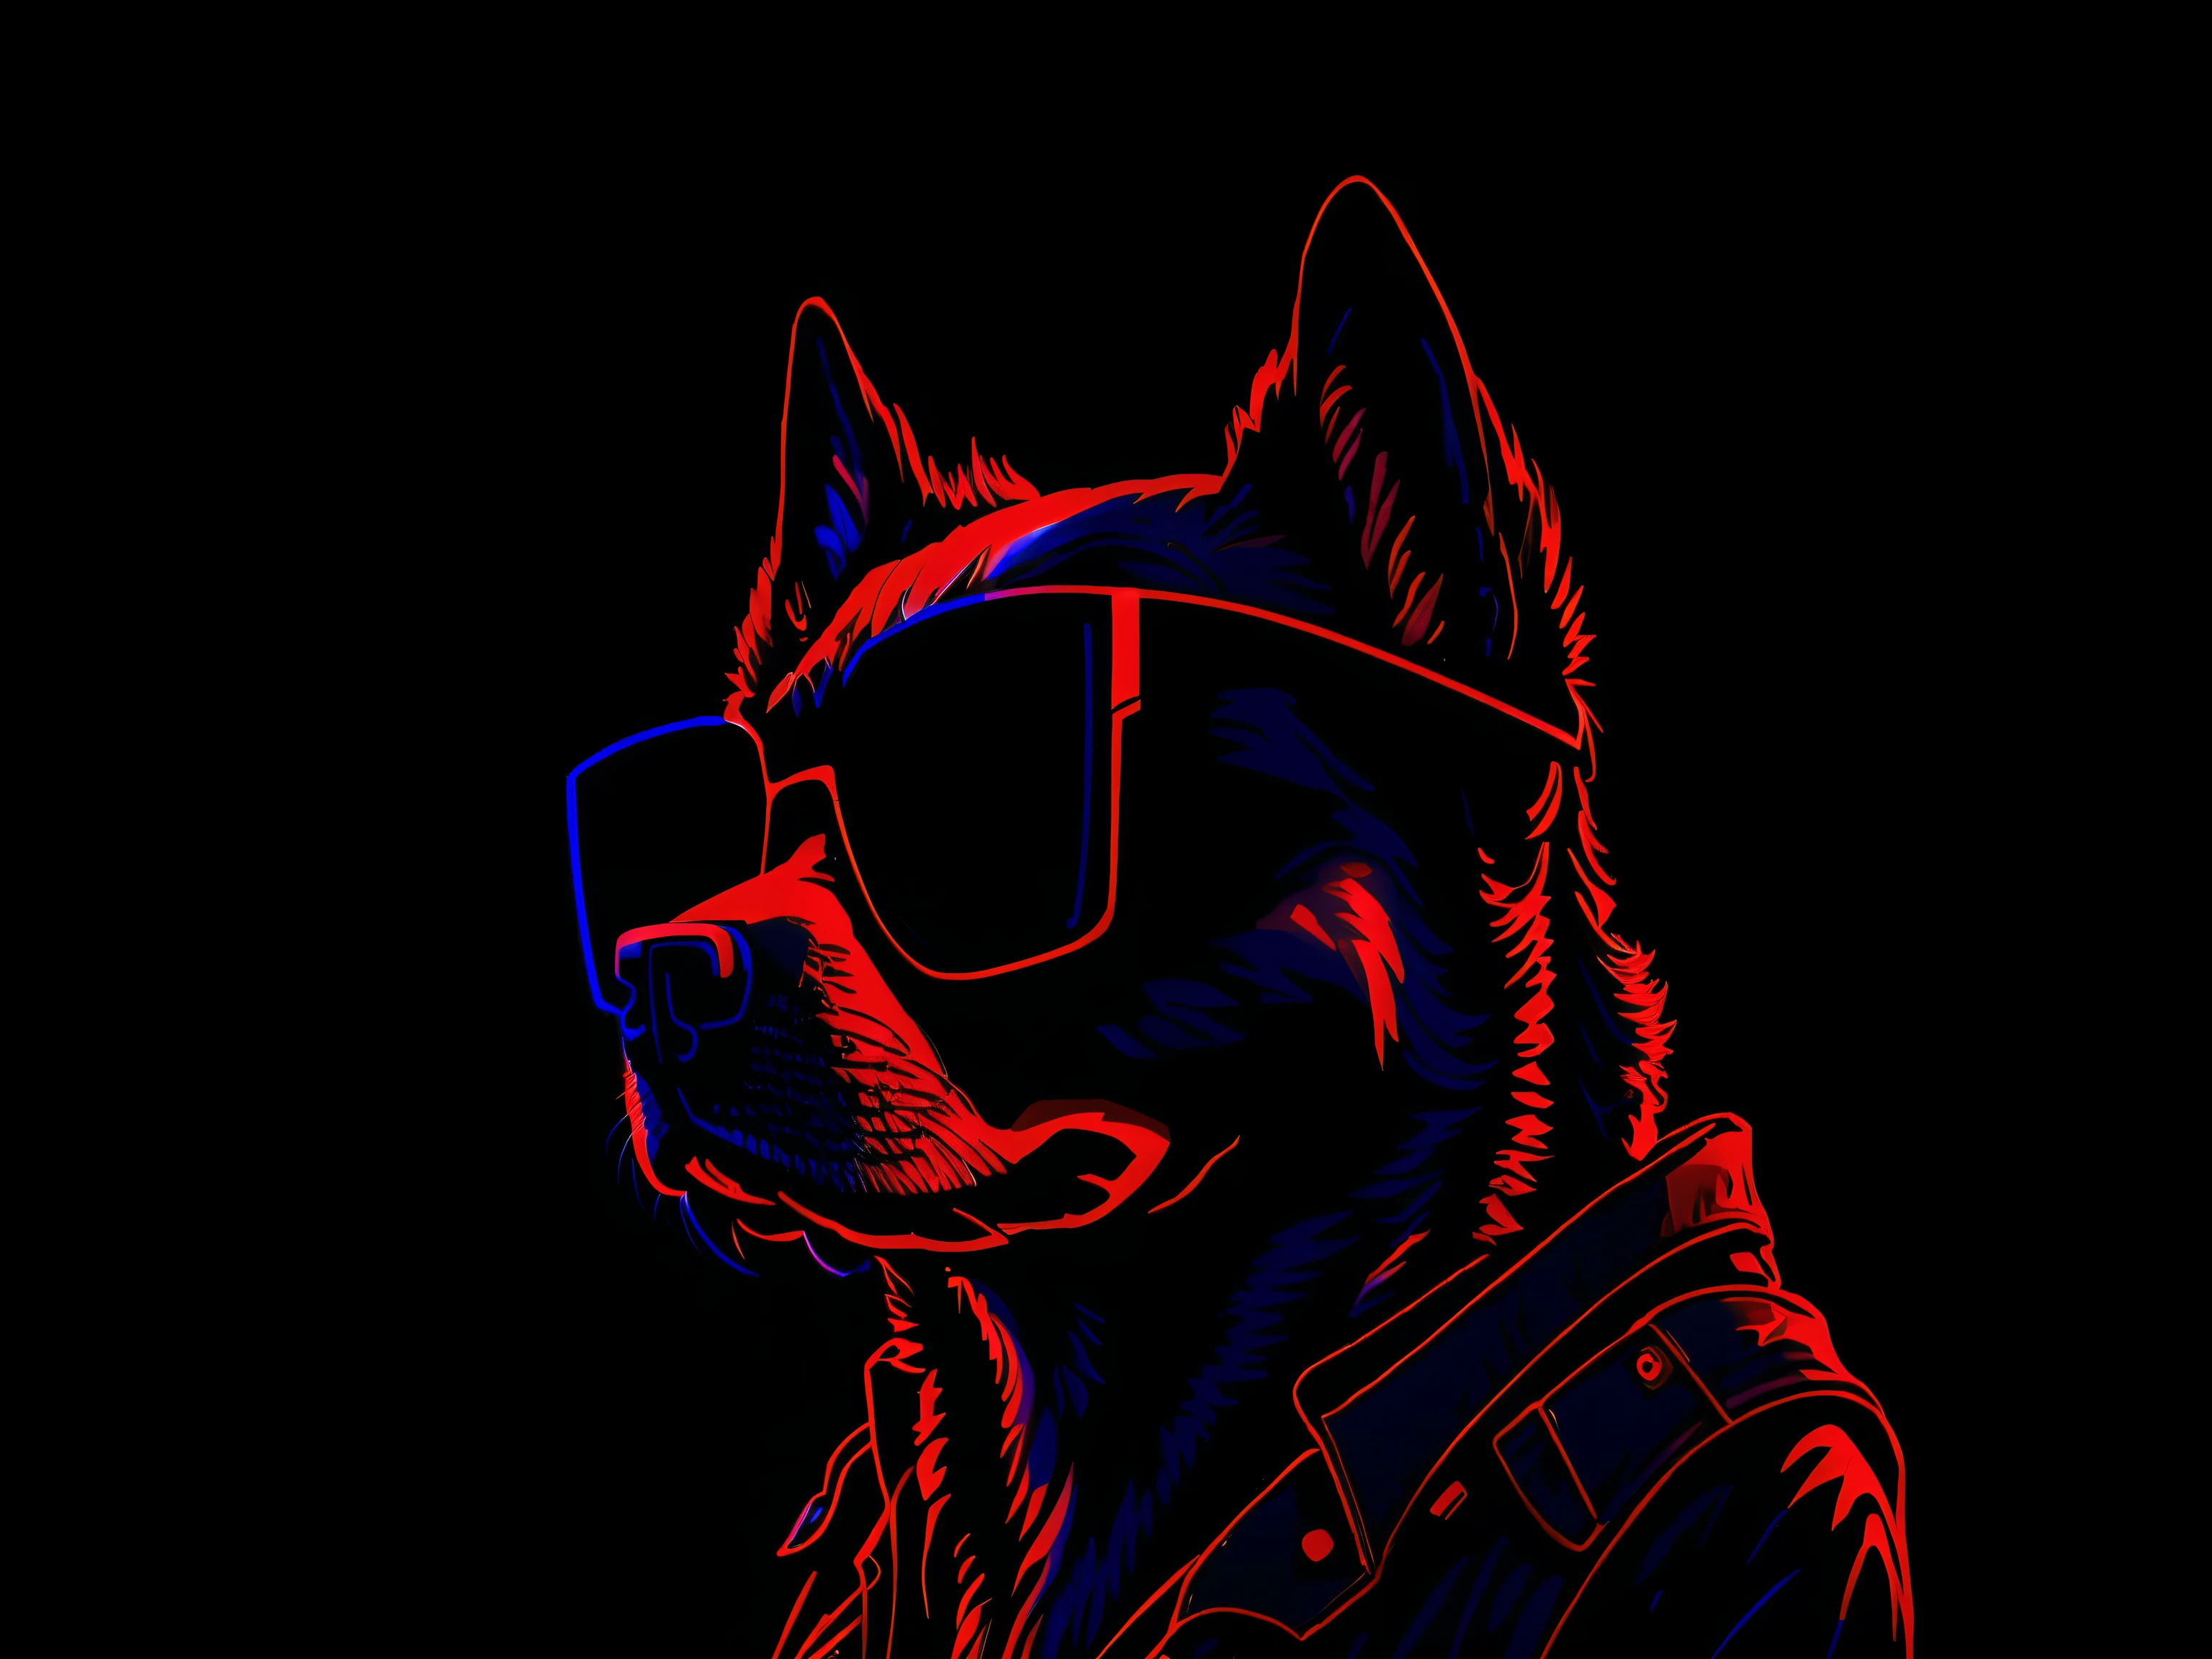 a close up of a dog wearing sunglasses on a black background, phone wallpaper hd, synthwave art style, hd phone wallpaper, looking heckin cool and stylish, furry digital art, red and blue neon, neon art style, husky in shiny armor, synthwave art style ]!!, in style of digital illustration, flat synthwave art style, phone wallpaper